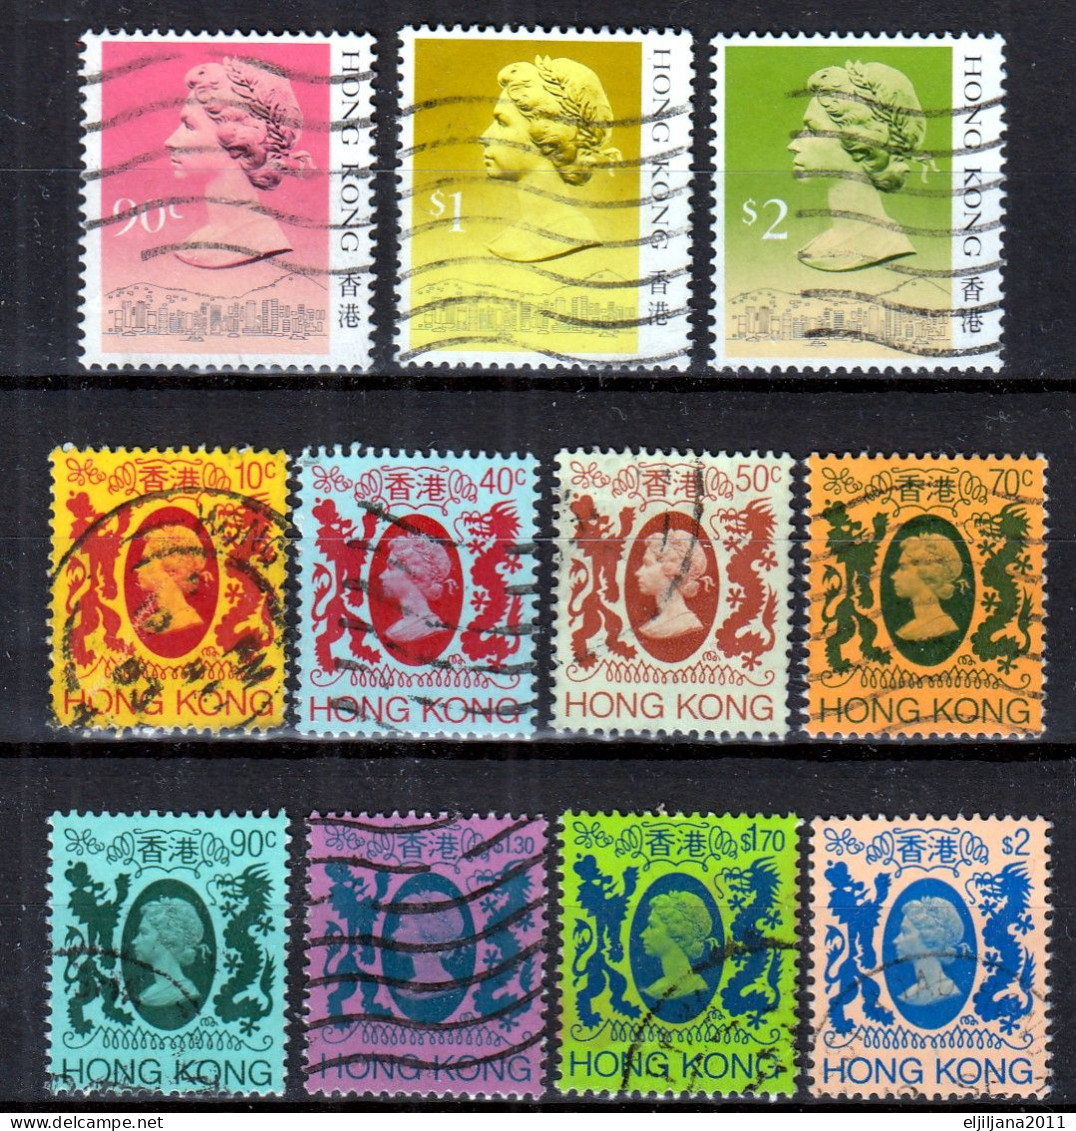 Action !! SALE !! 50 % OFF !! ⁕ HONG KONG 1982 - 1987 ⁕ QEII Collection ⁕ 11v Used - Gebraucht